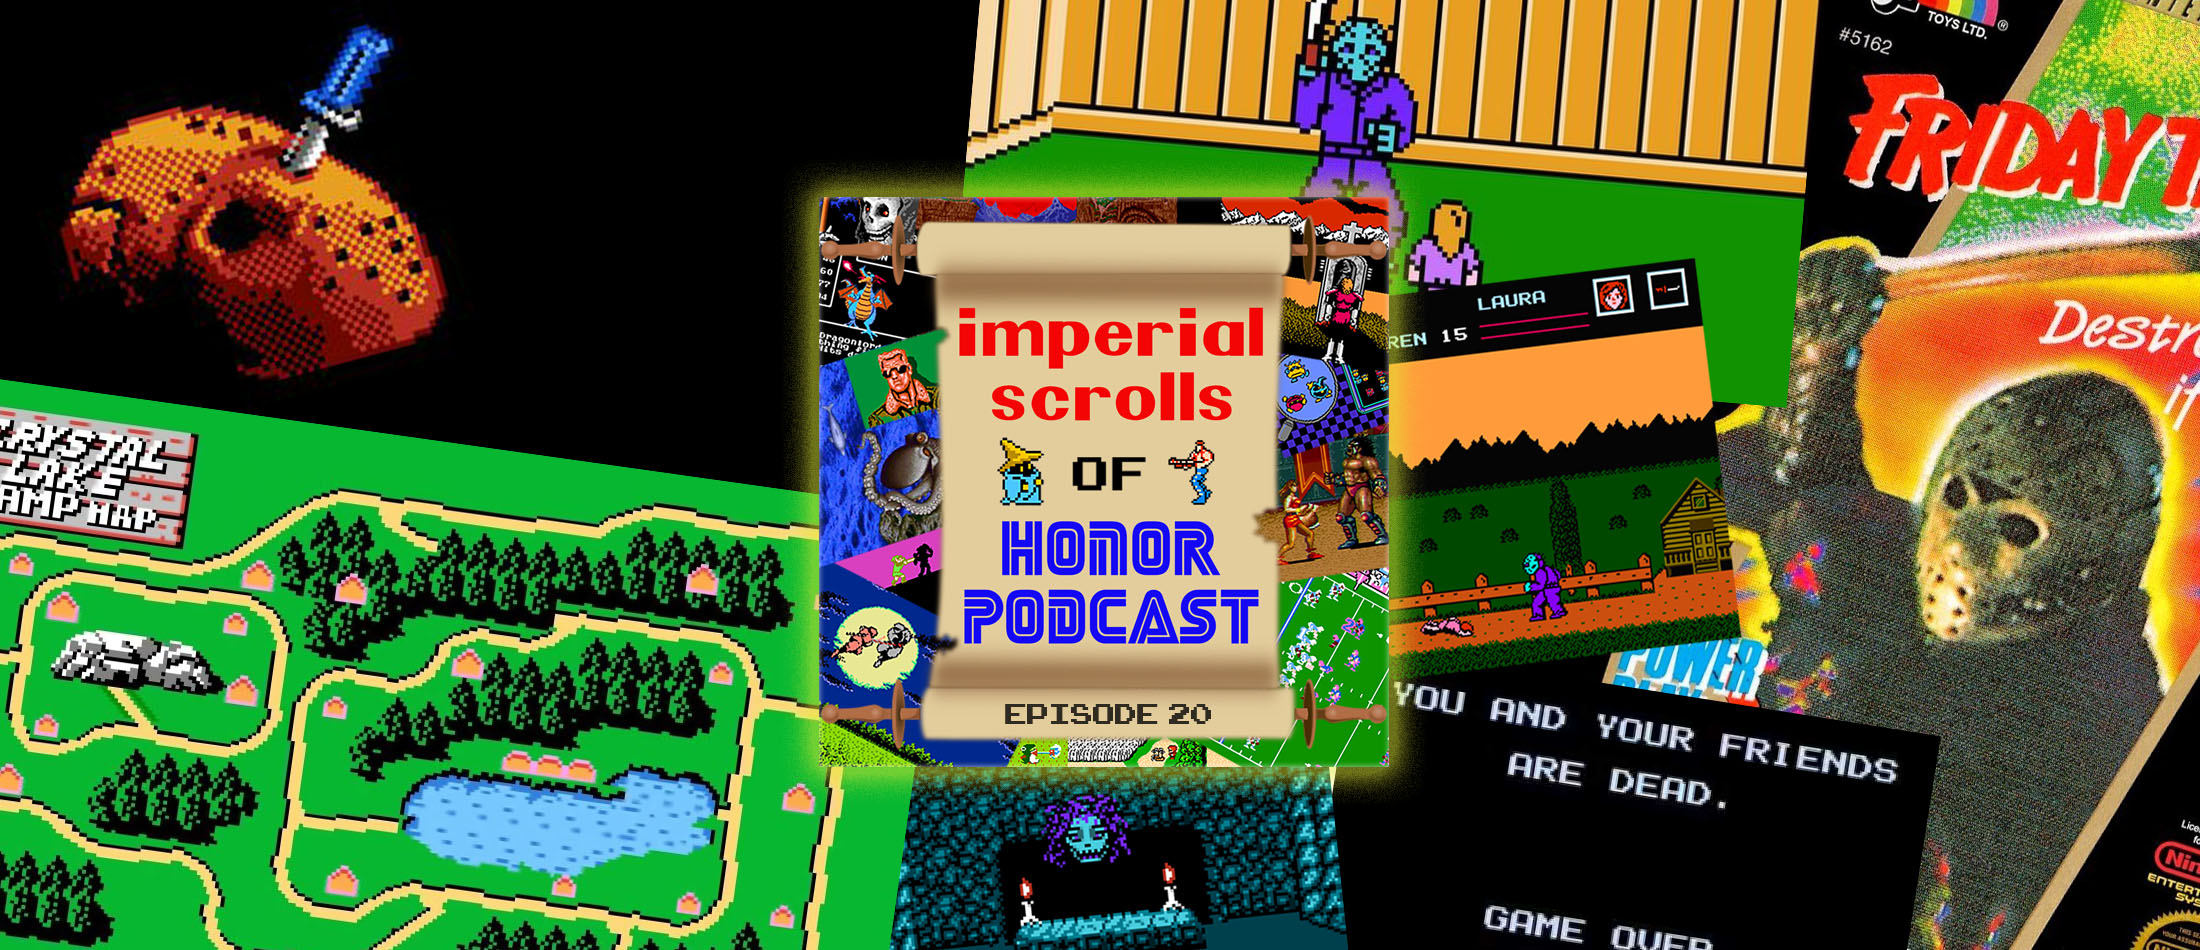 Imperial Scrolls of Honor - Episode 20 - Friday the 13th (NES)